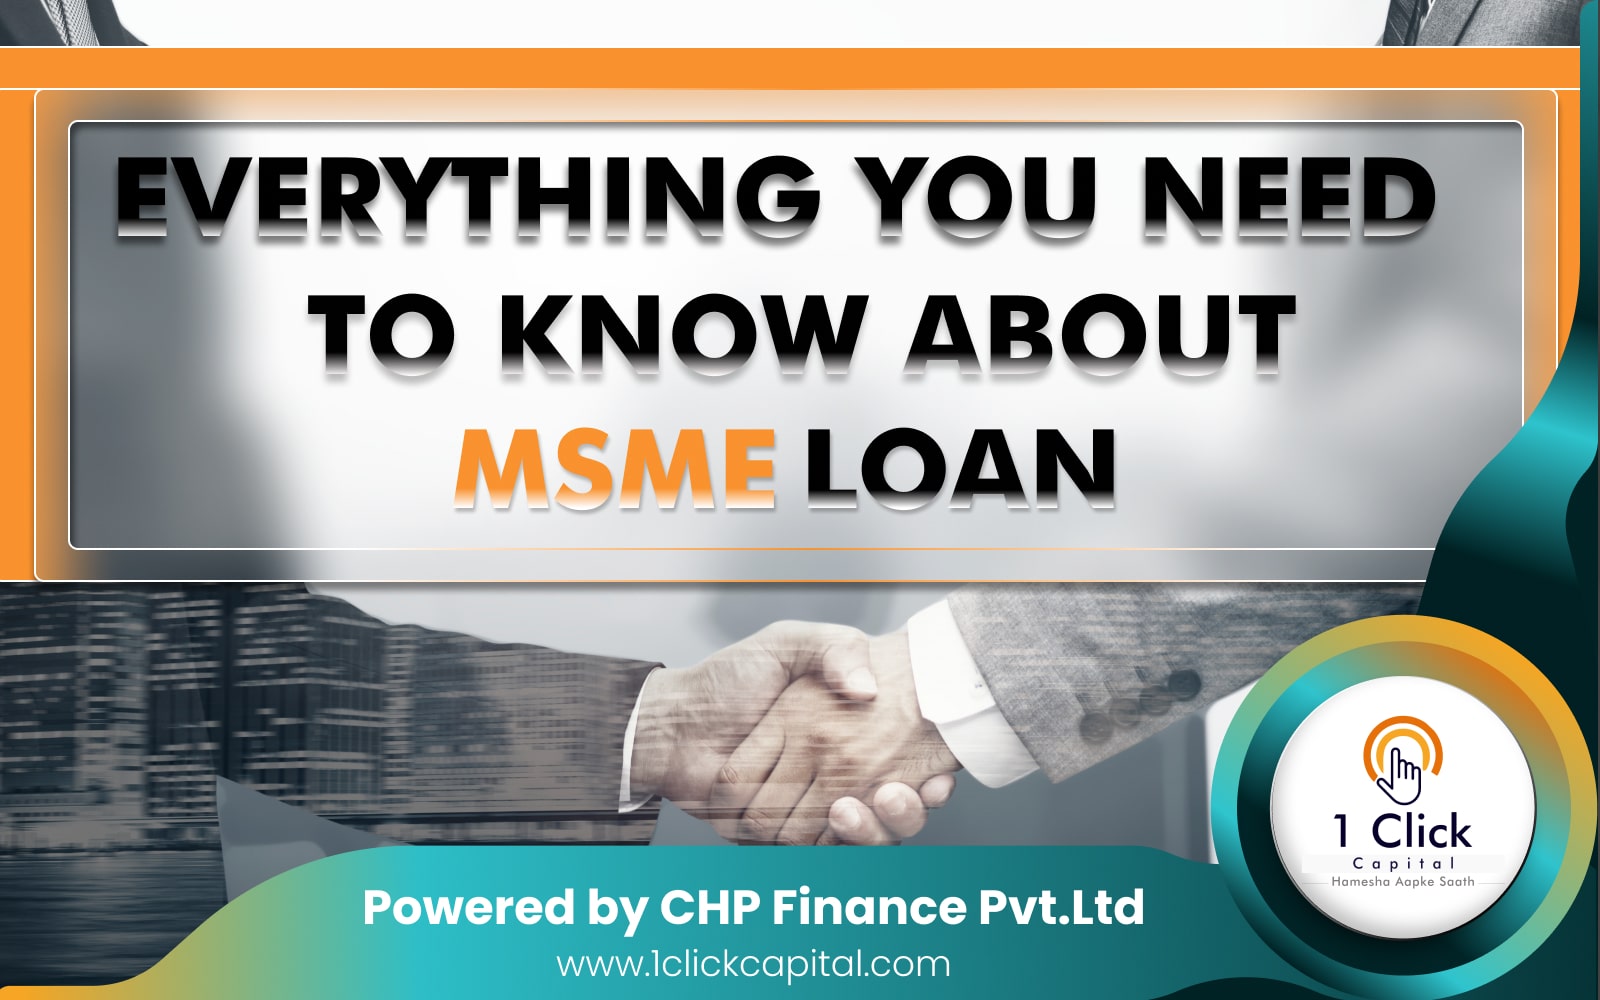 Everything you need to know about MSME loans